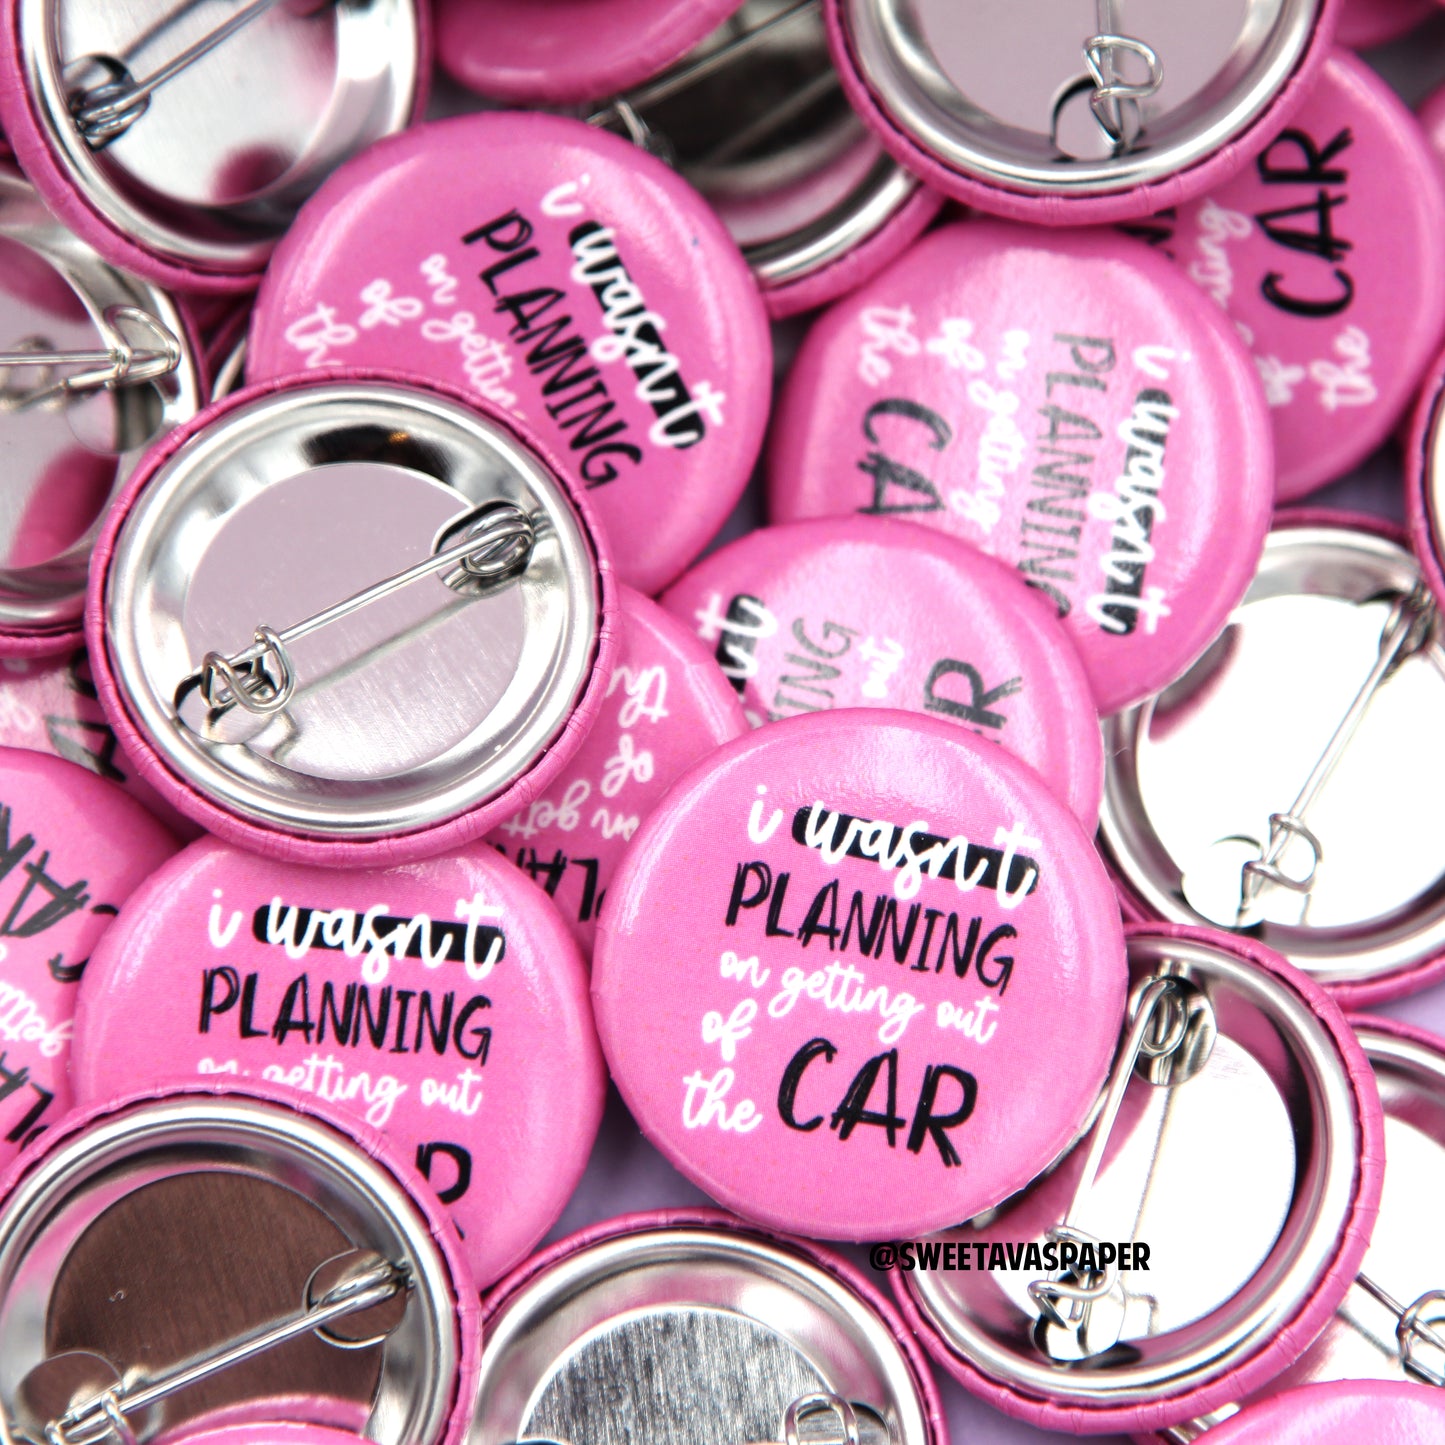 I Wasn't Planning On Getting Out Of The Car - 1.25" Pinback Button